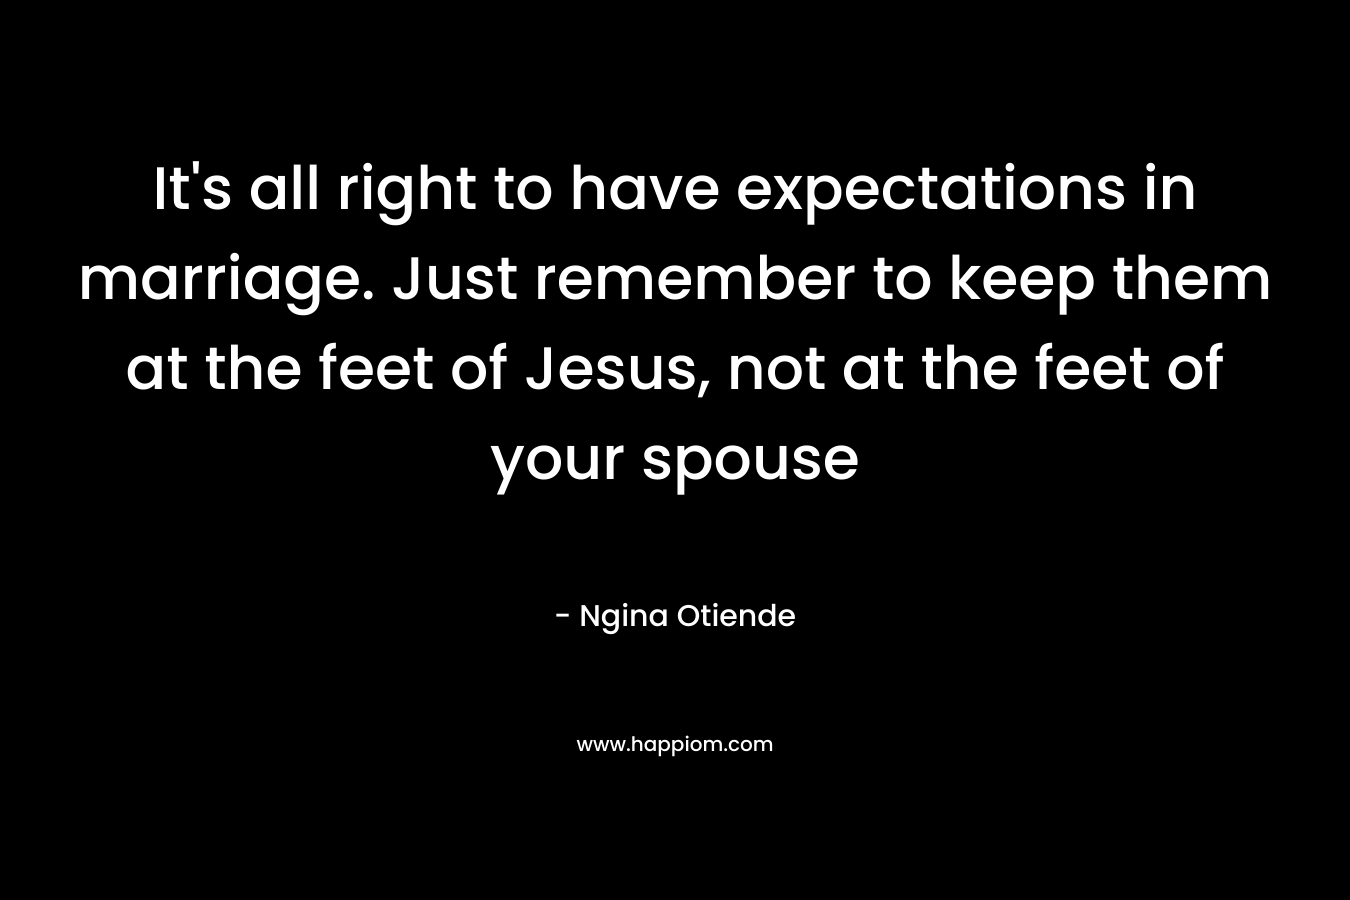 It's all right to have expectations in marriage. Just remember to keep them at the feet of Jesus, not at the feet of your spouse